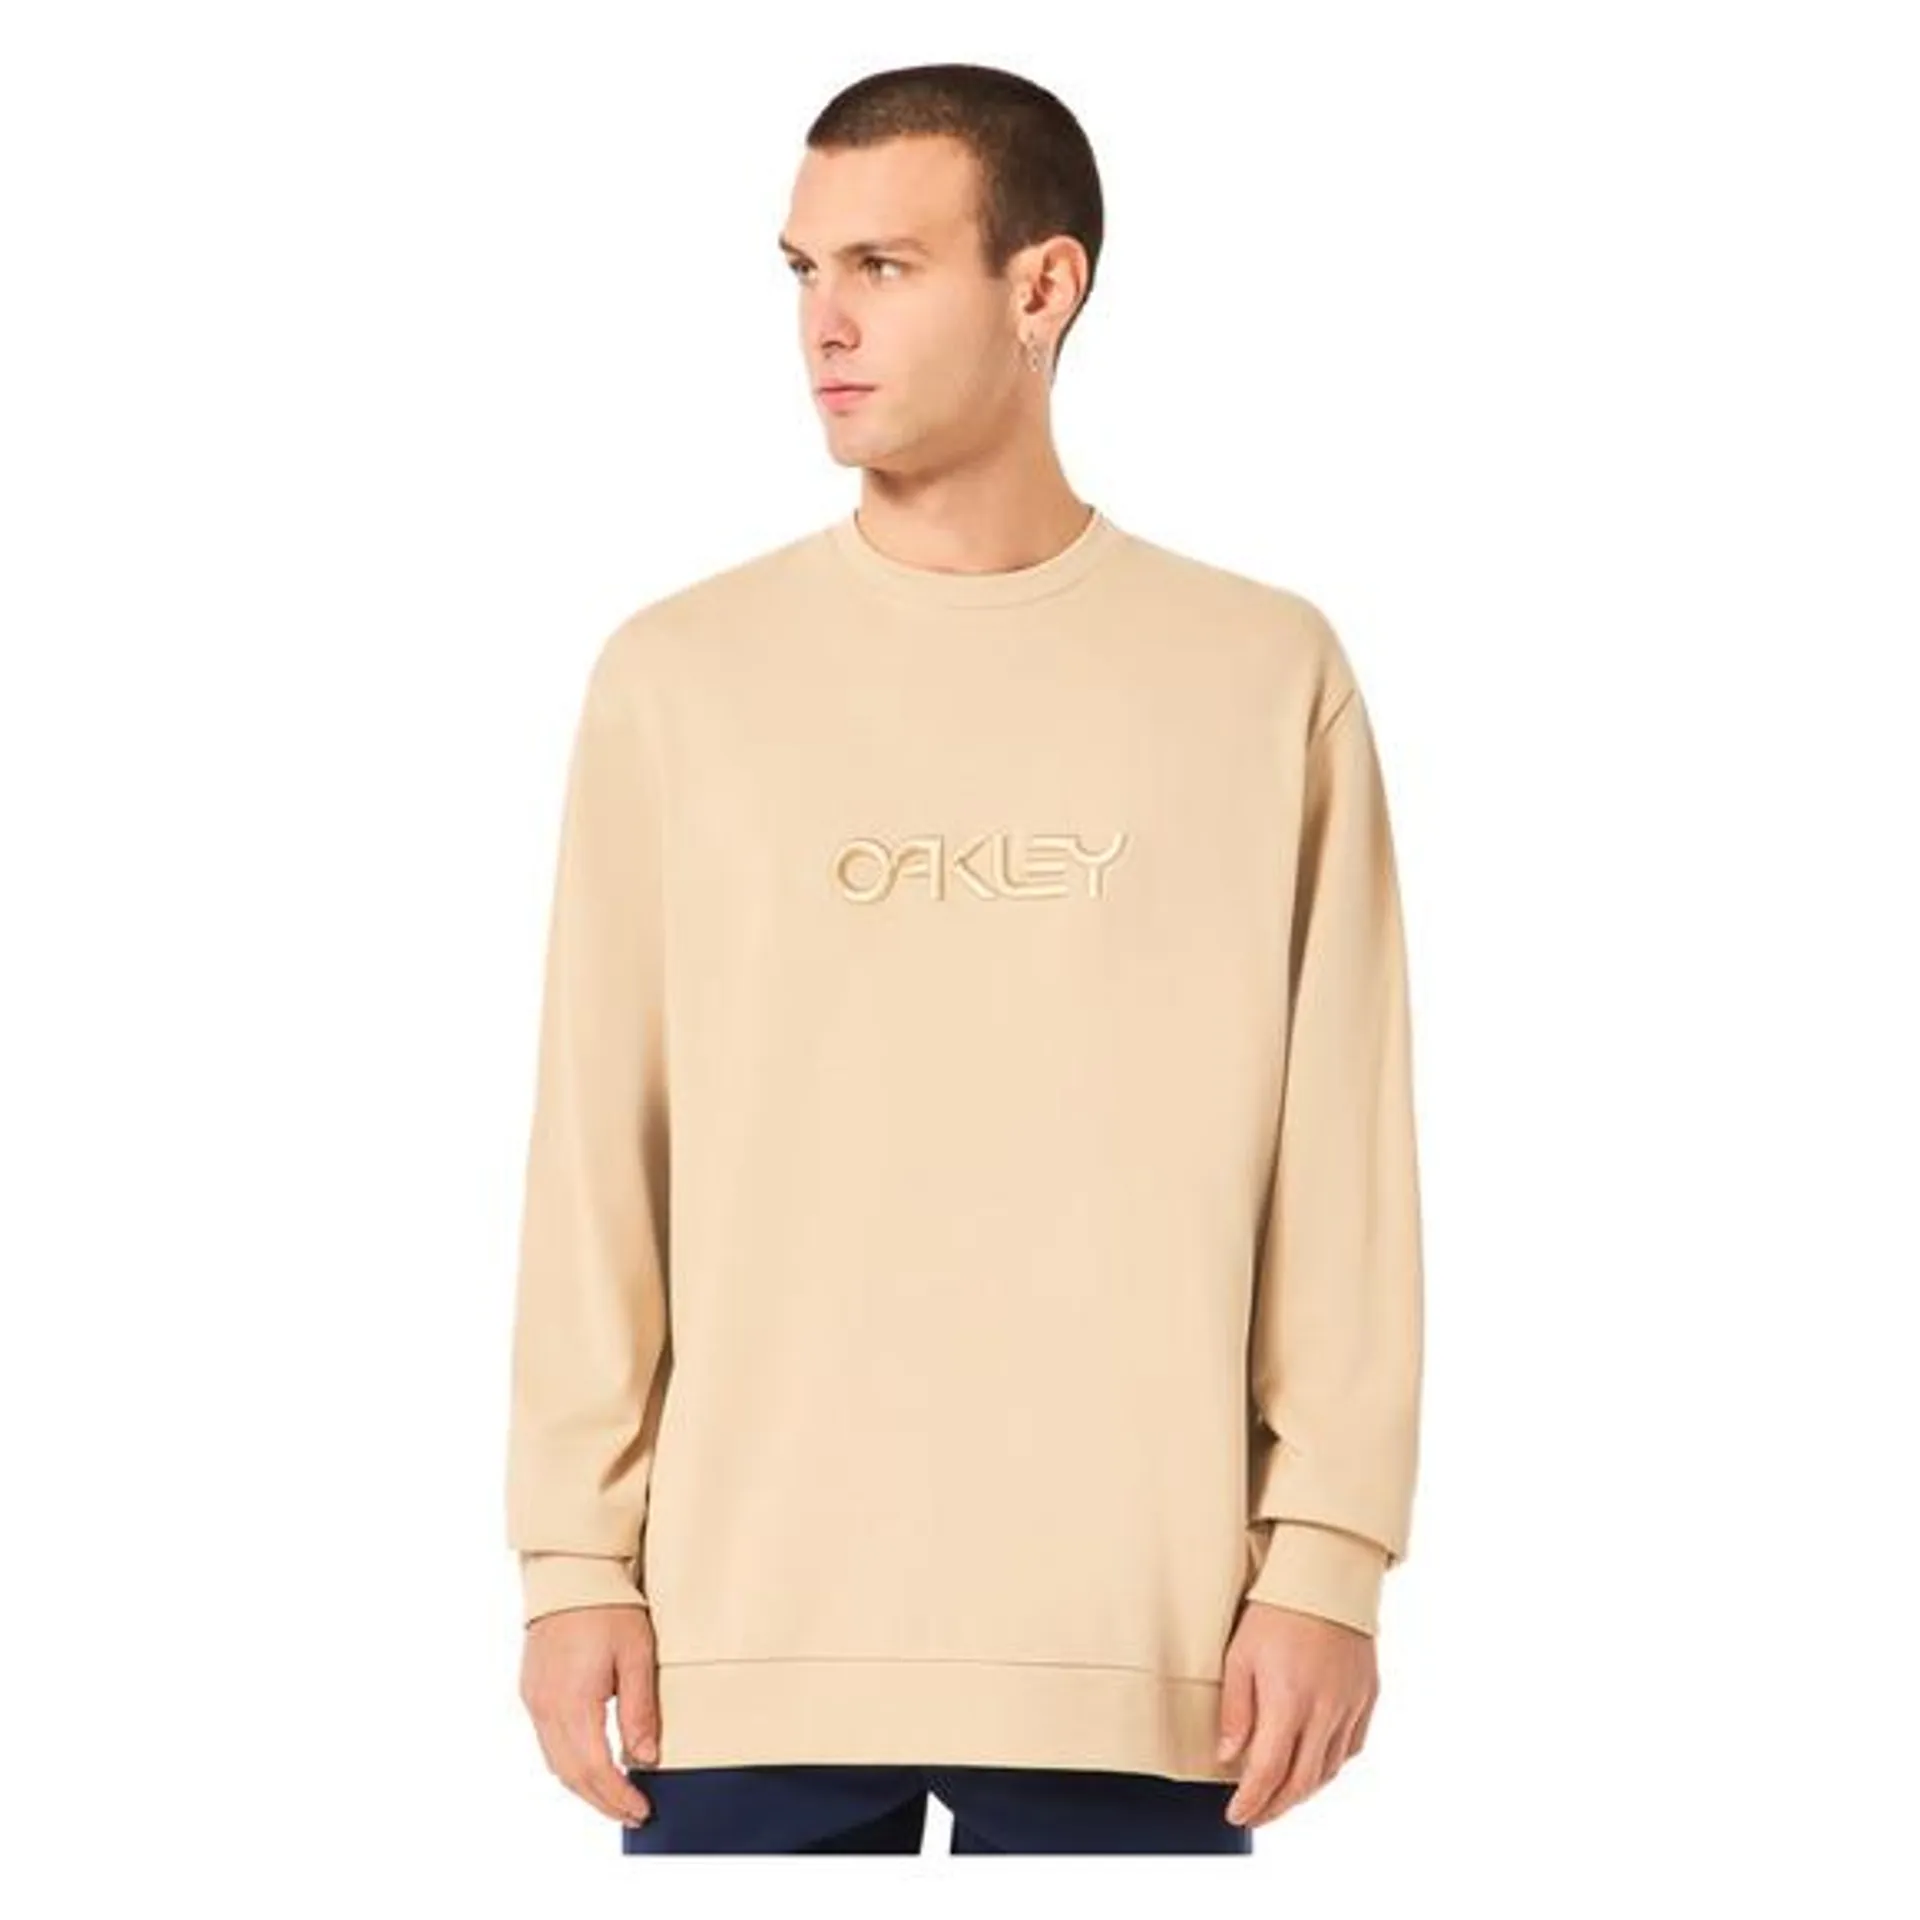 Embroidered - Men's Long-Sleeved Shirt